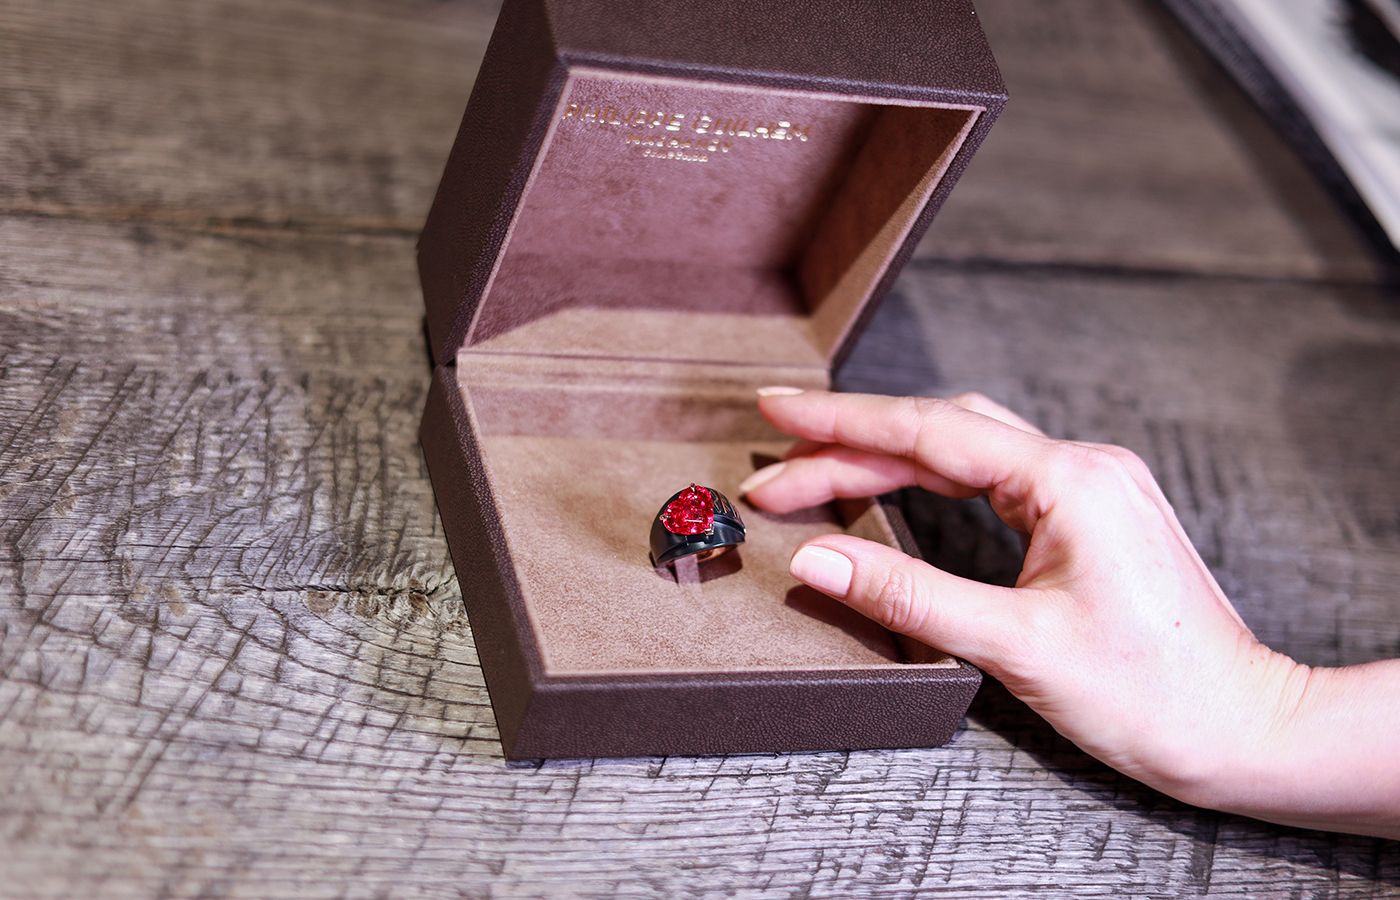 Mashandy Origyne Imisy ring with a 9.55 carat rubellite and runic letters that’s on display at the Philippe Guilhem Mashandy boutique in Megève